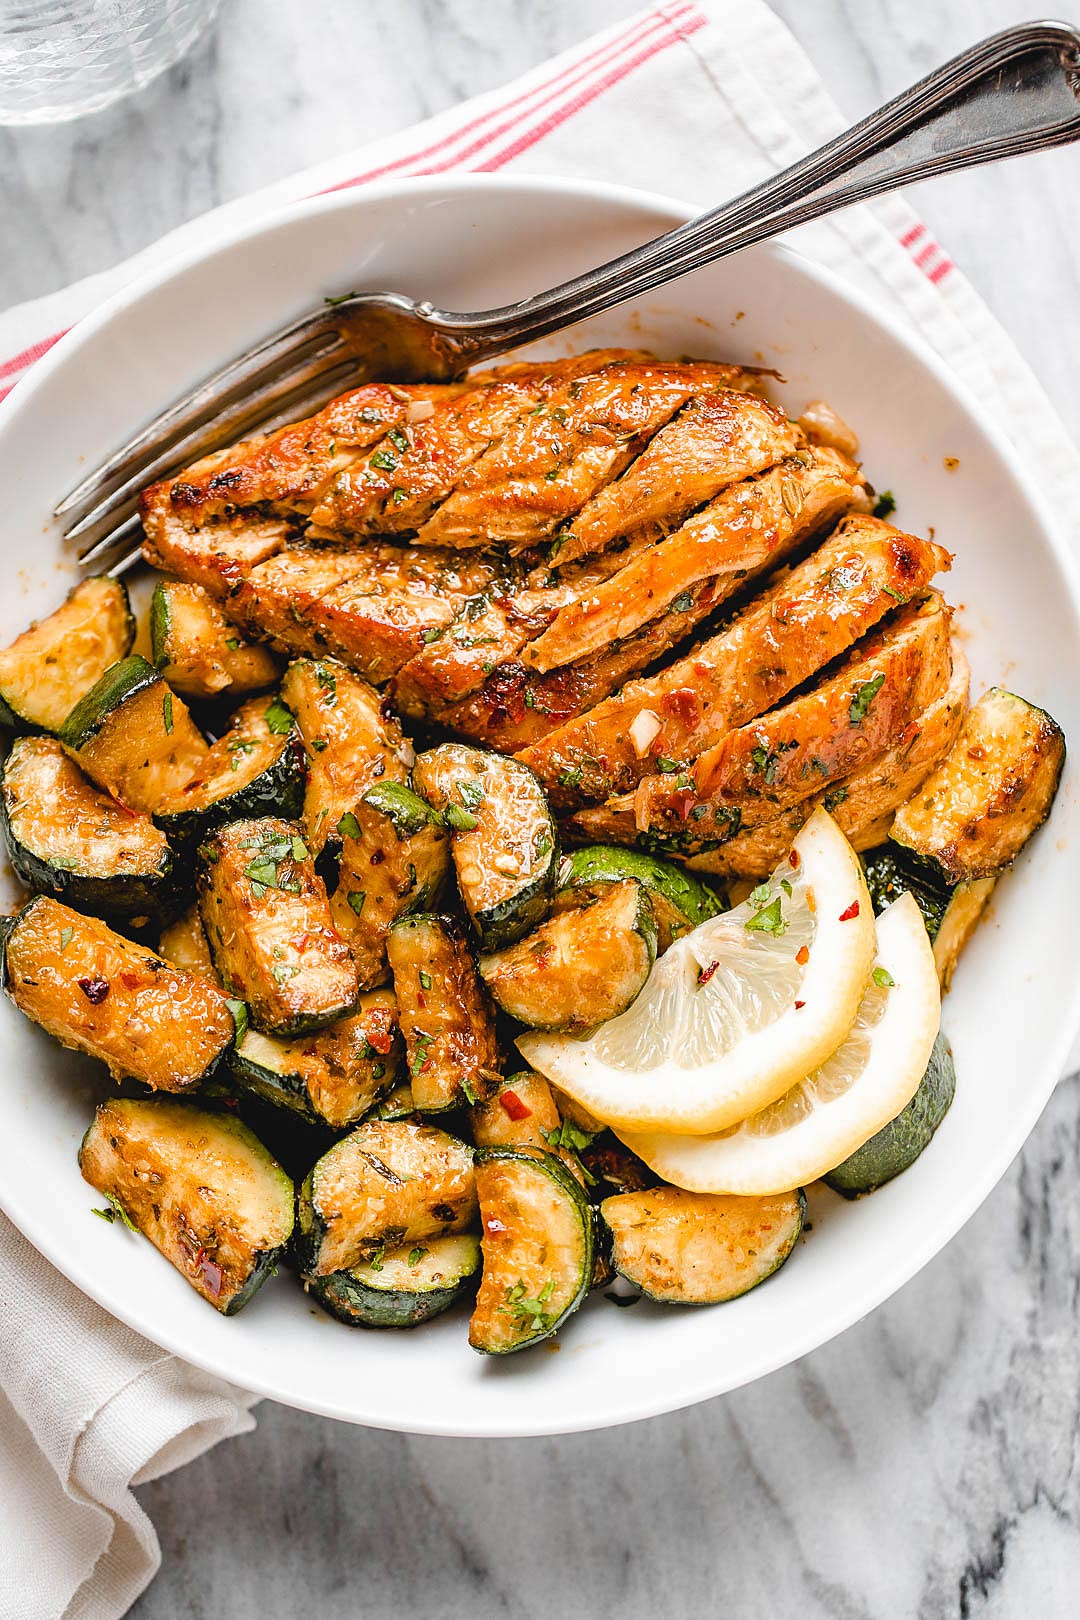 Healthy Chicken Breast Recipes 39 Healthy Chicken Breast Recipes For Dinner — Eatwell101